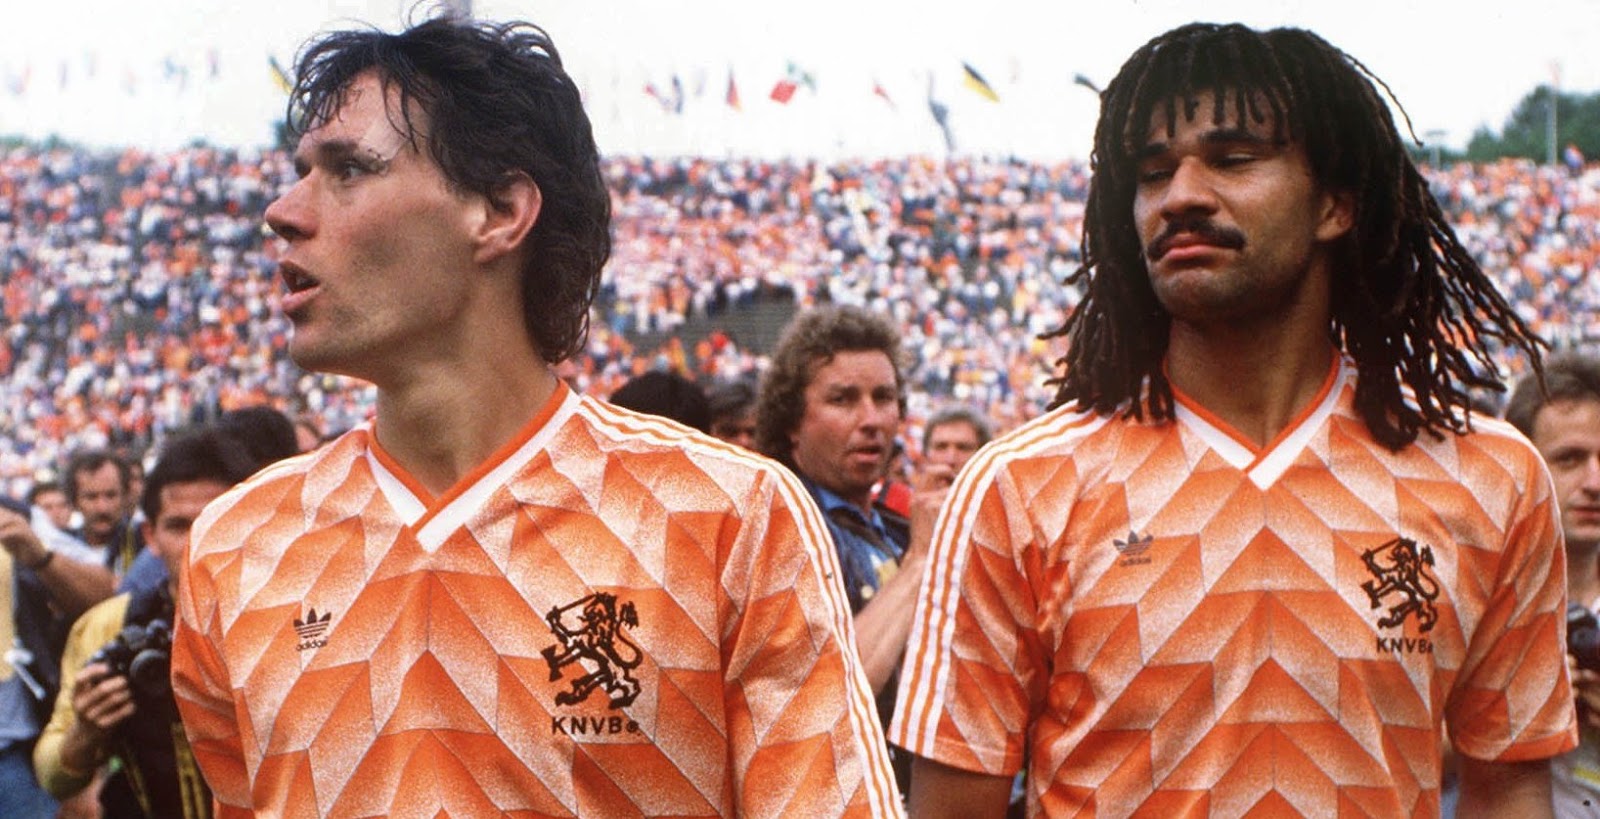 Andes geeuwen Civiel Netherlands Euro 1988 Kit-Inspired - Adidas Glitch 18 Moment Boots Released  - Footy Headlines